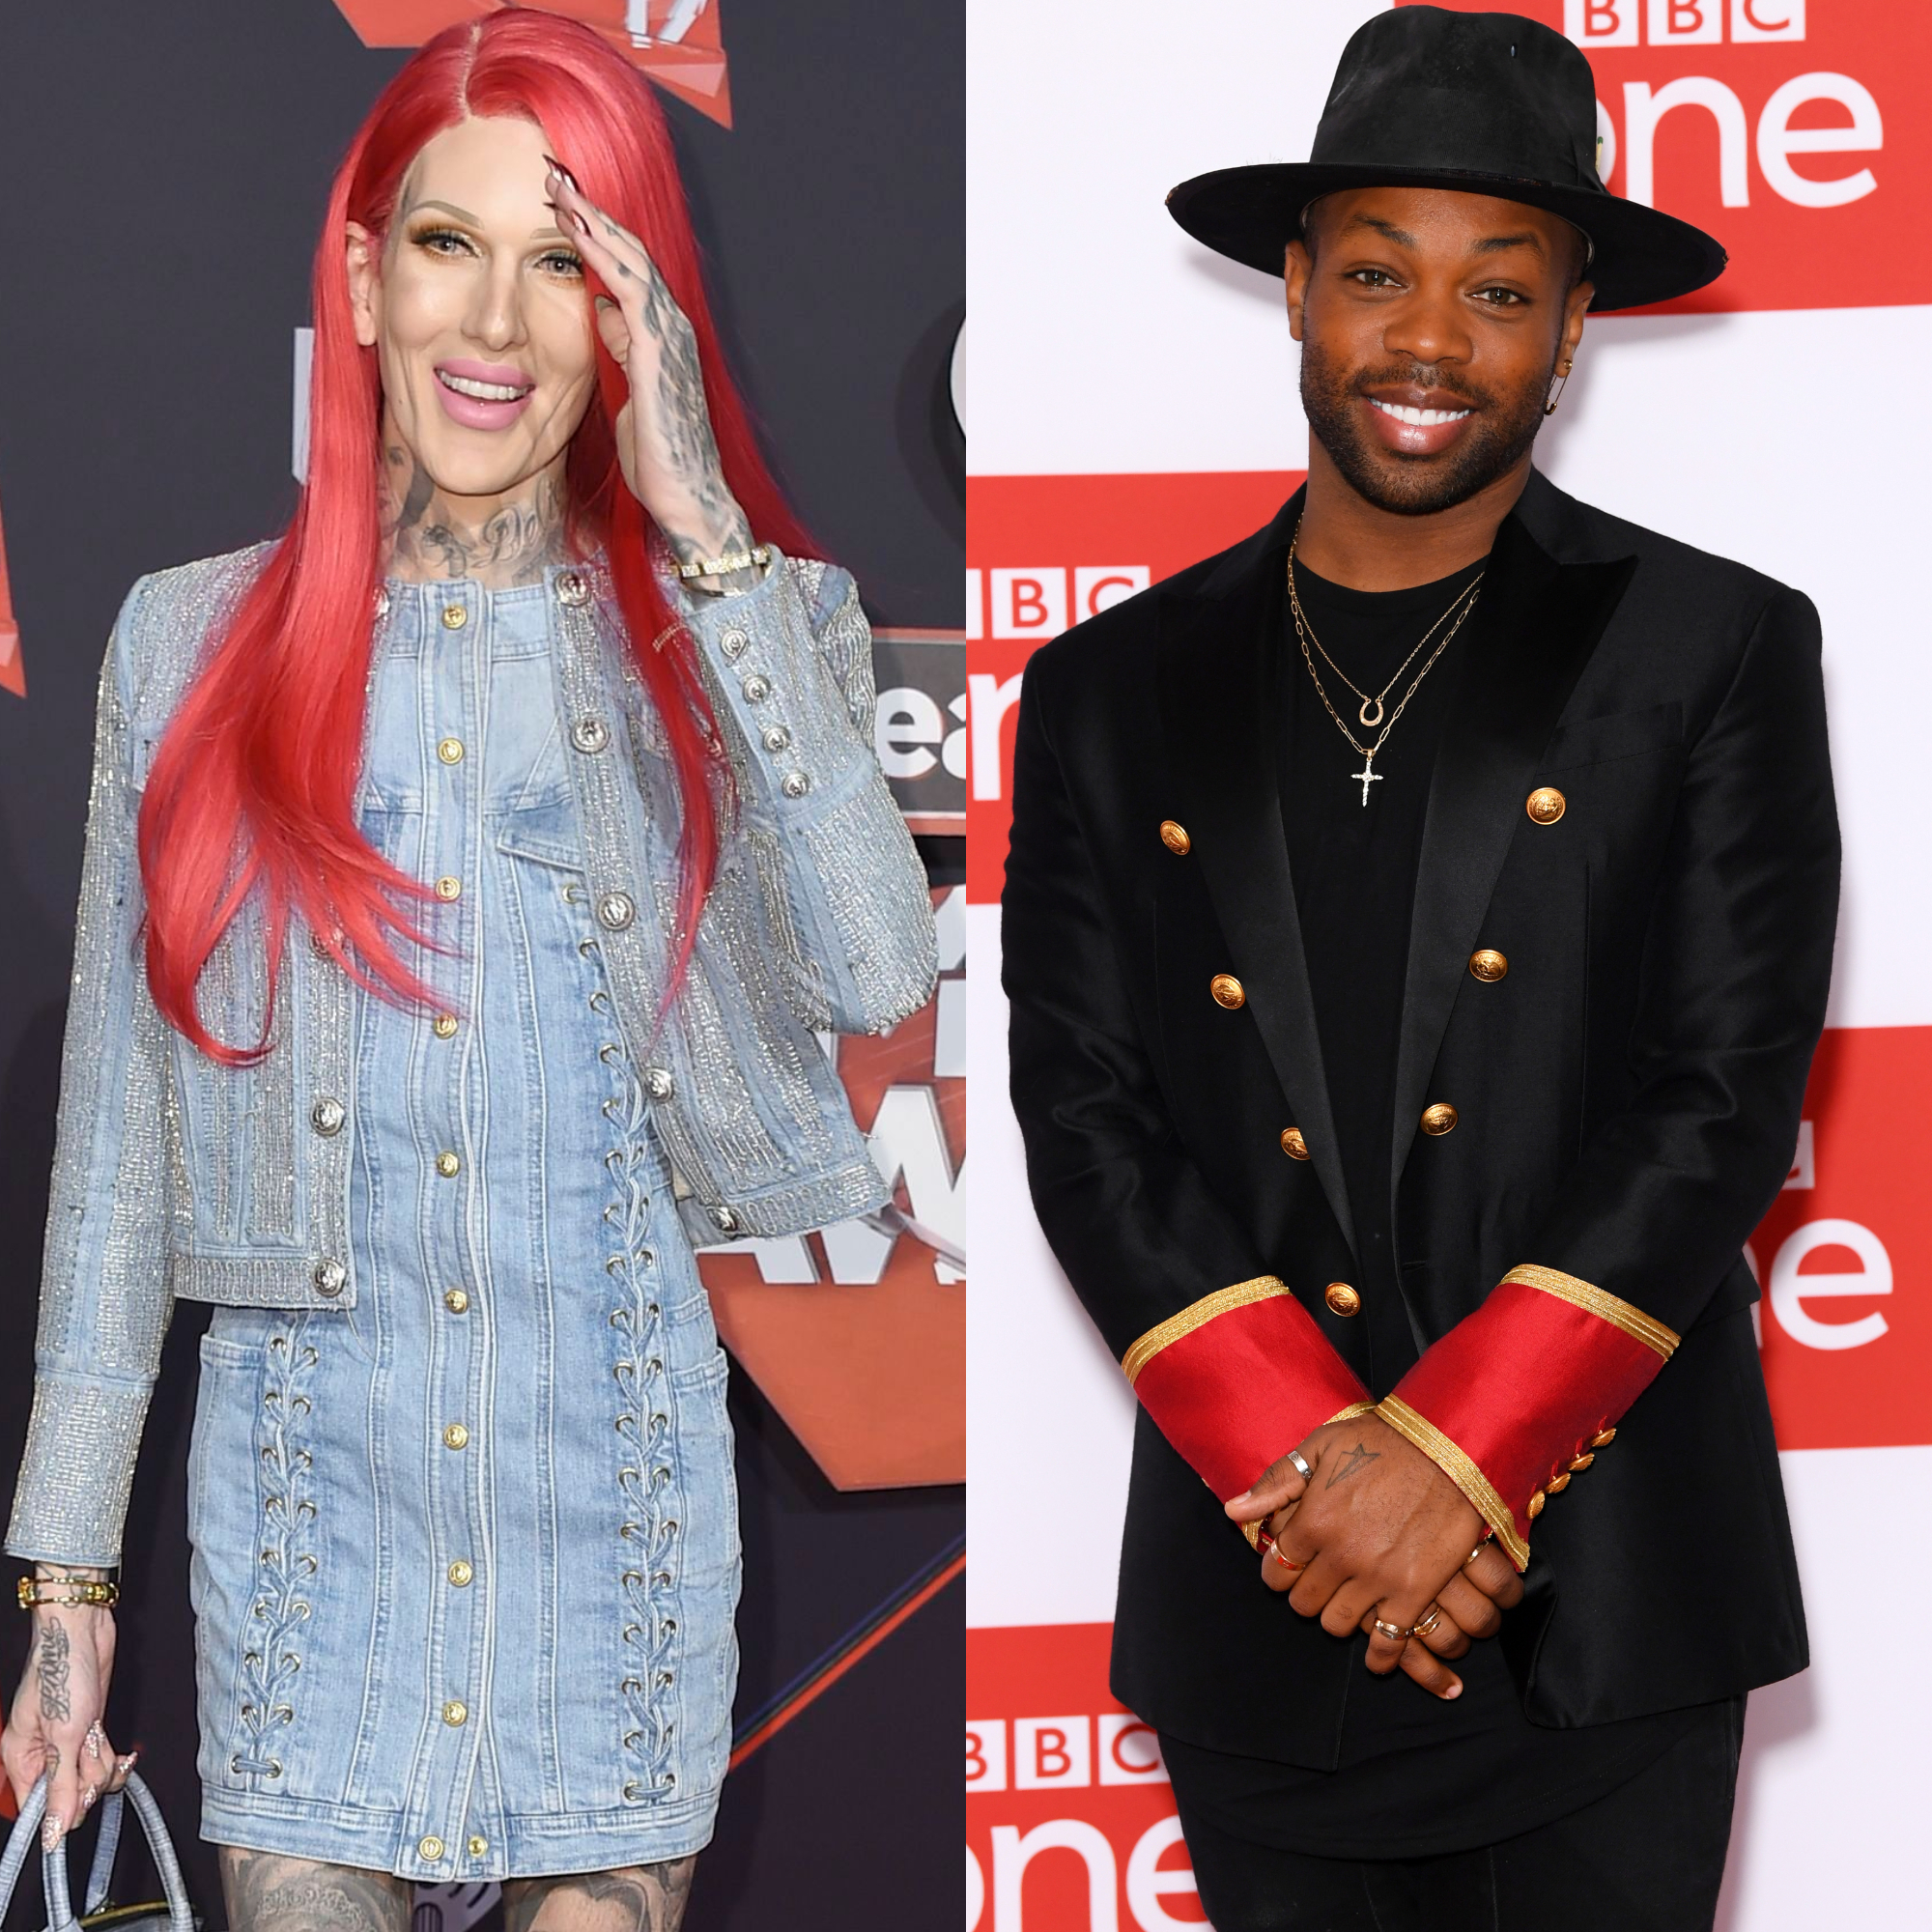 Jeffree Star and Todrick Hall Have a Flirty Exchange on Instagram